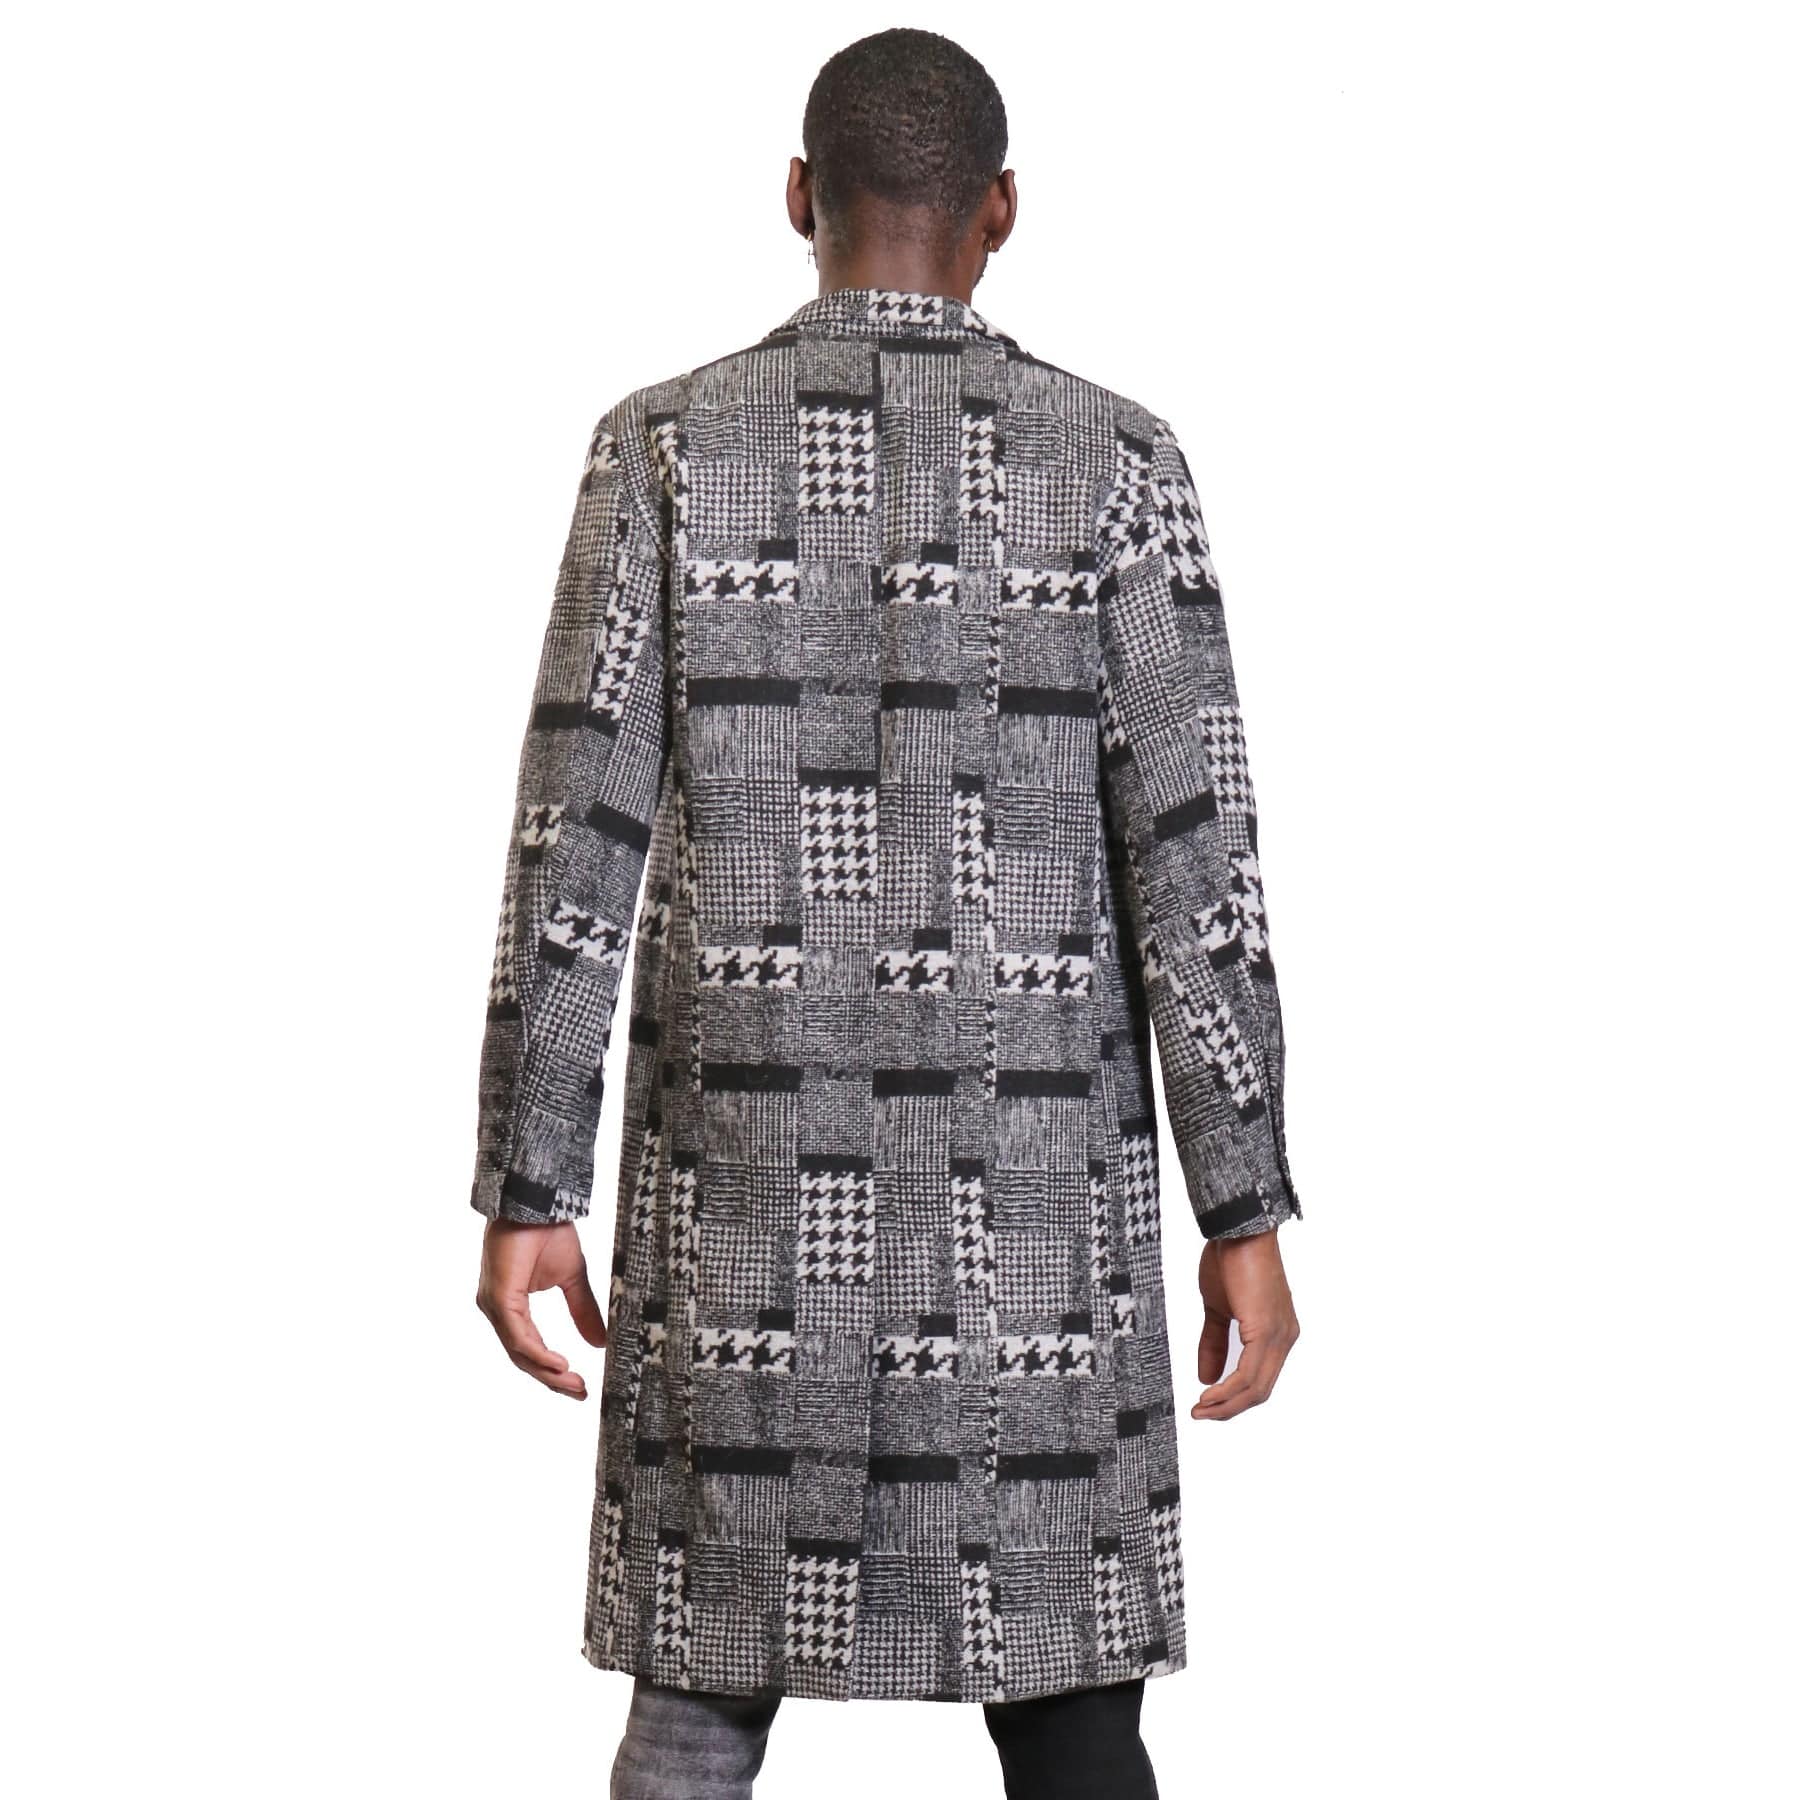 Neo black and white houndstooth pattern Wool Coat Jacket – Love to 